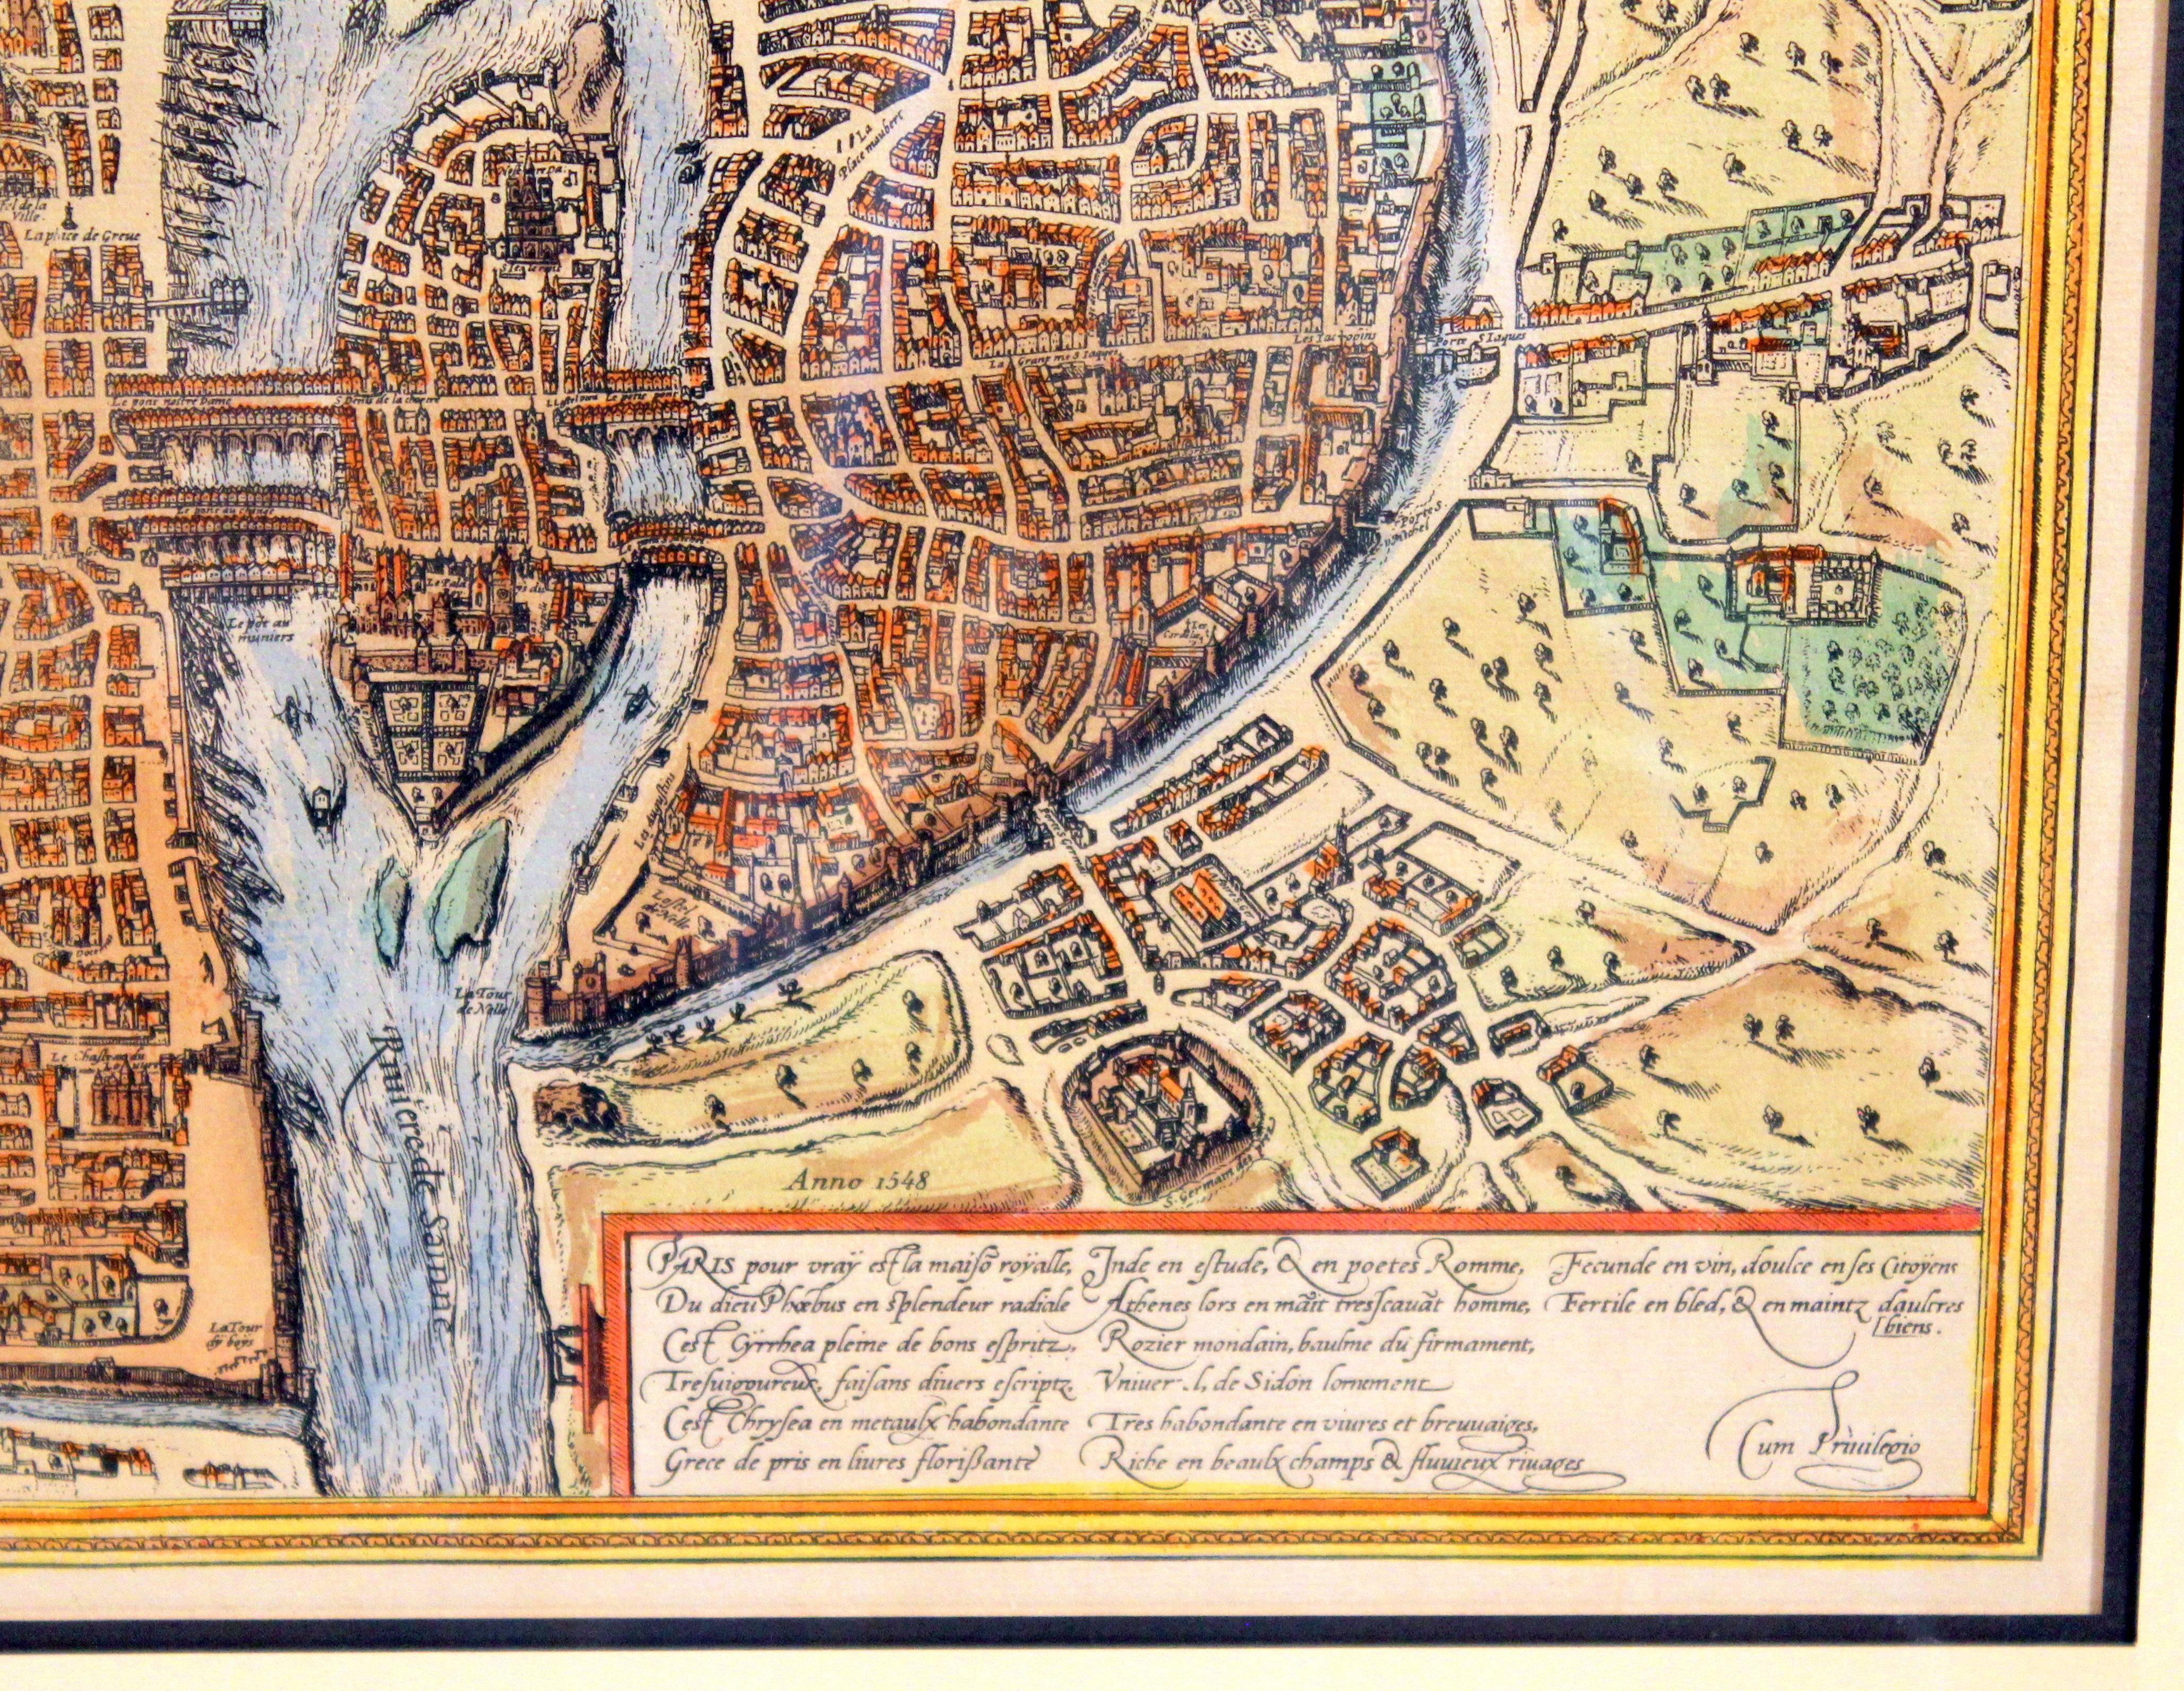 Renaissance Old Engraving Map of Paris French Munster 16th Century Walled City Framed For Sale